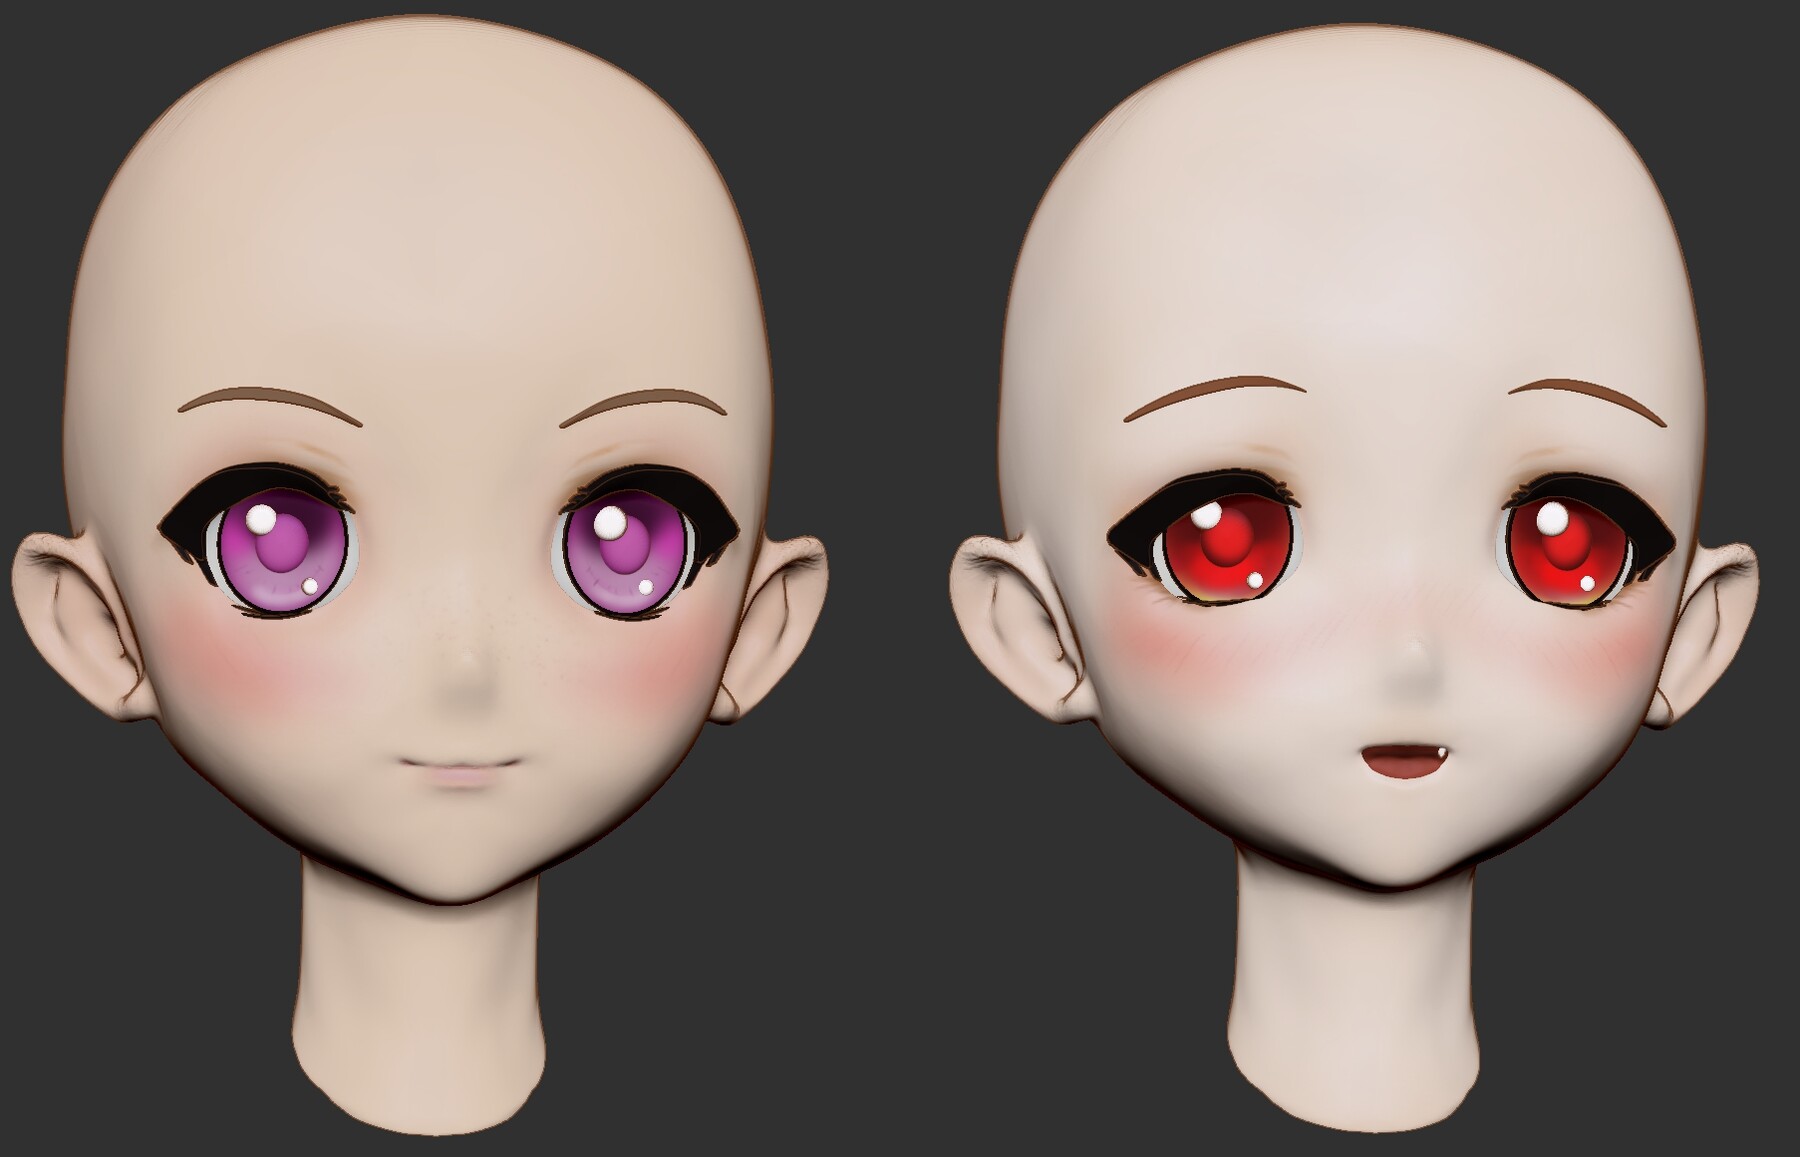 zbrush anime head download